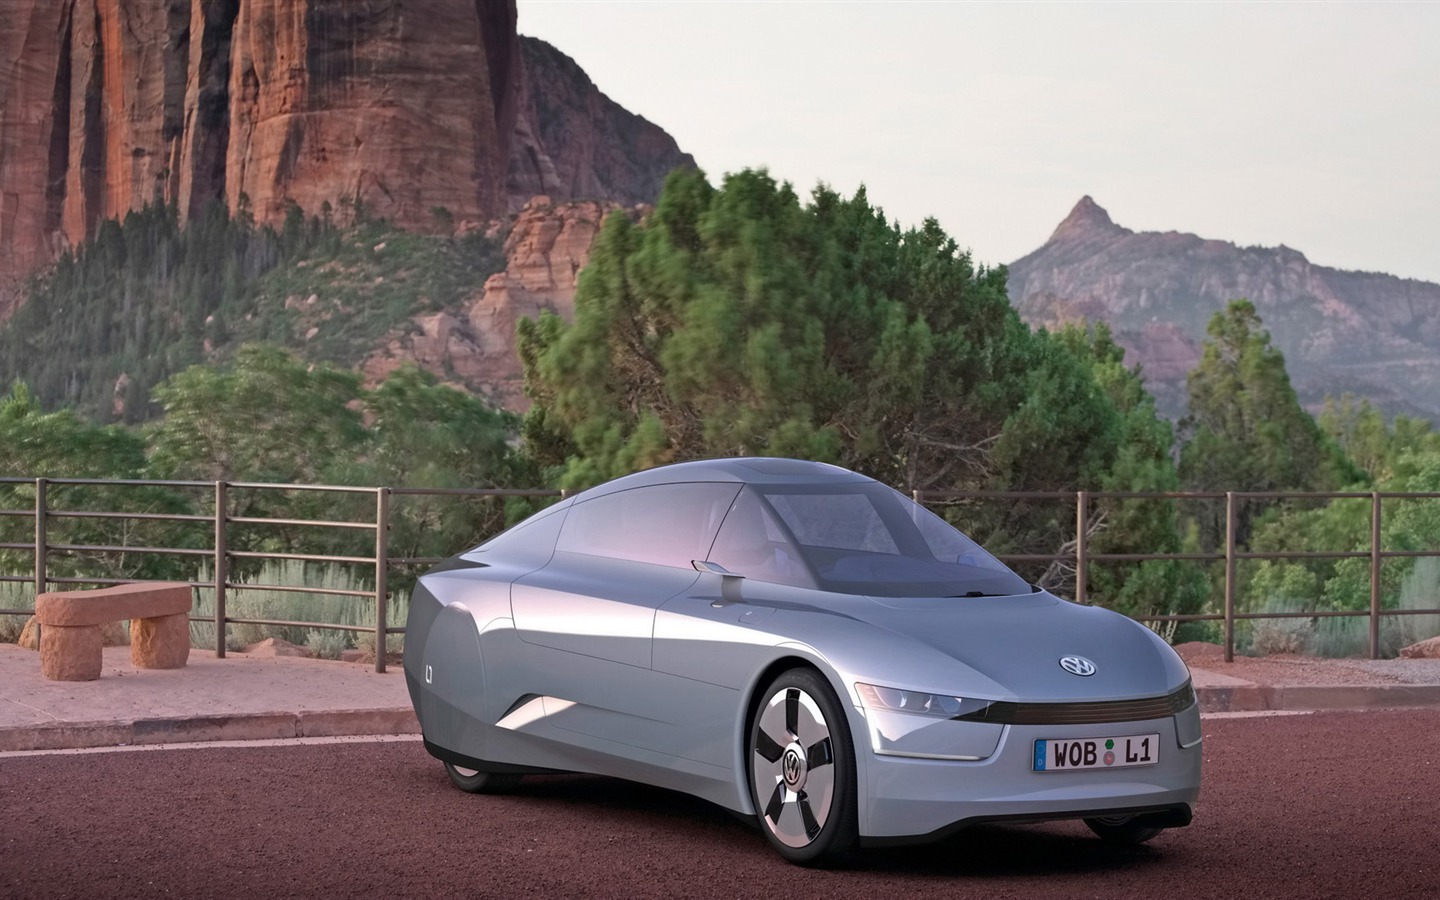 Volkswagen L1 Tapety Concept Car #4 - 1440x900